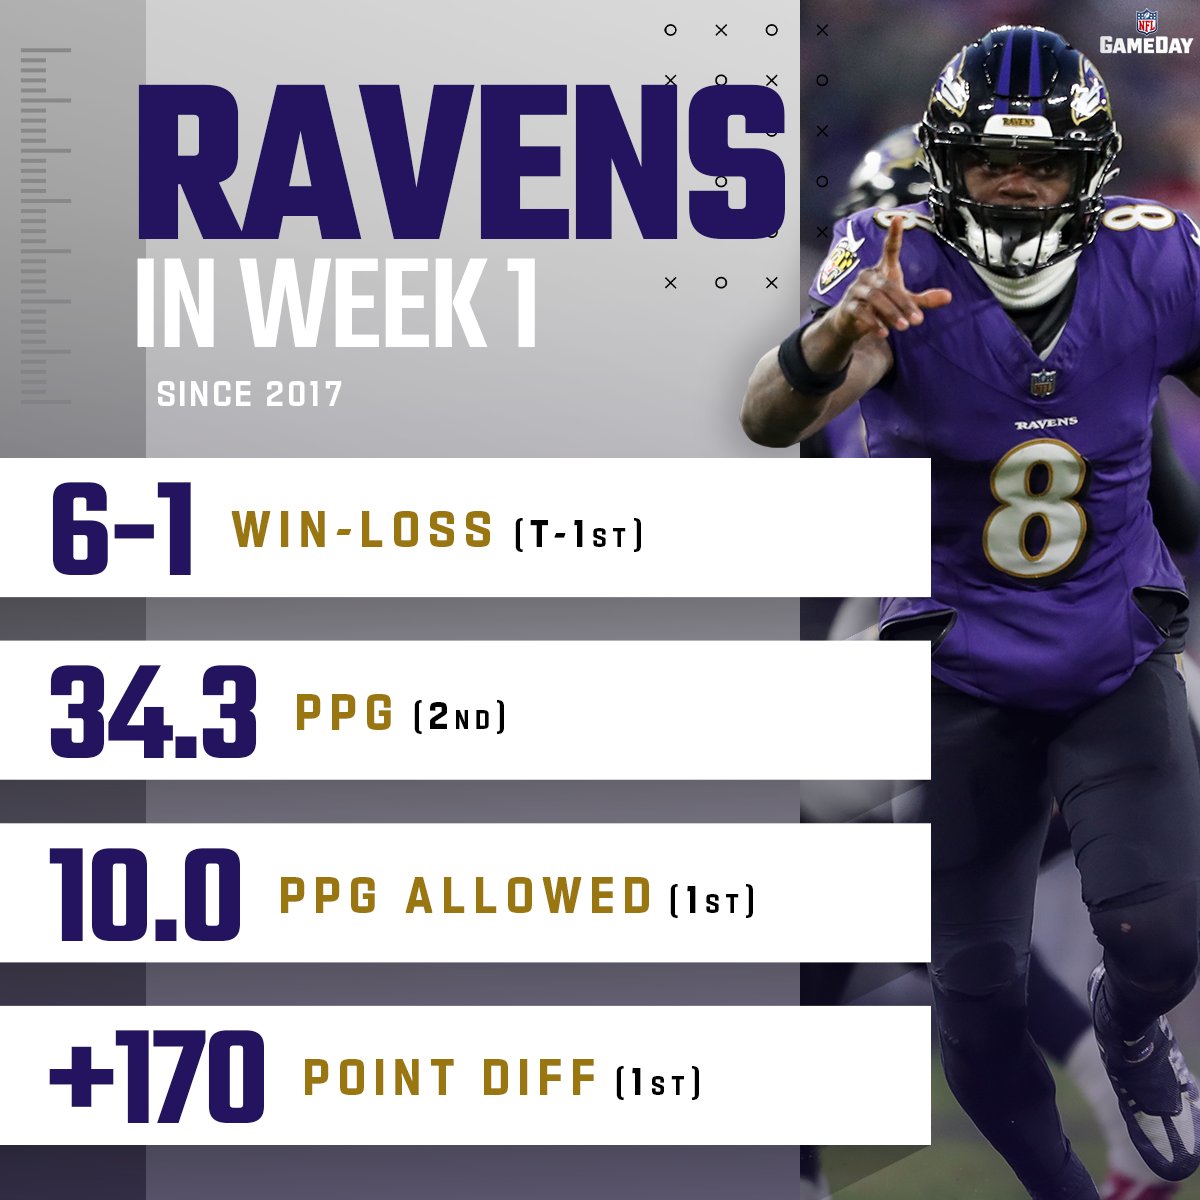 The Ravens are built for Week 1 in Arrowhead 😤